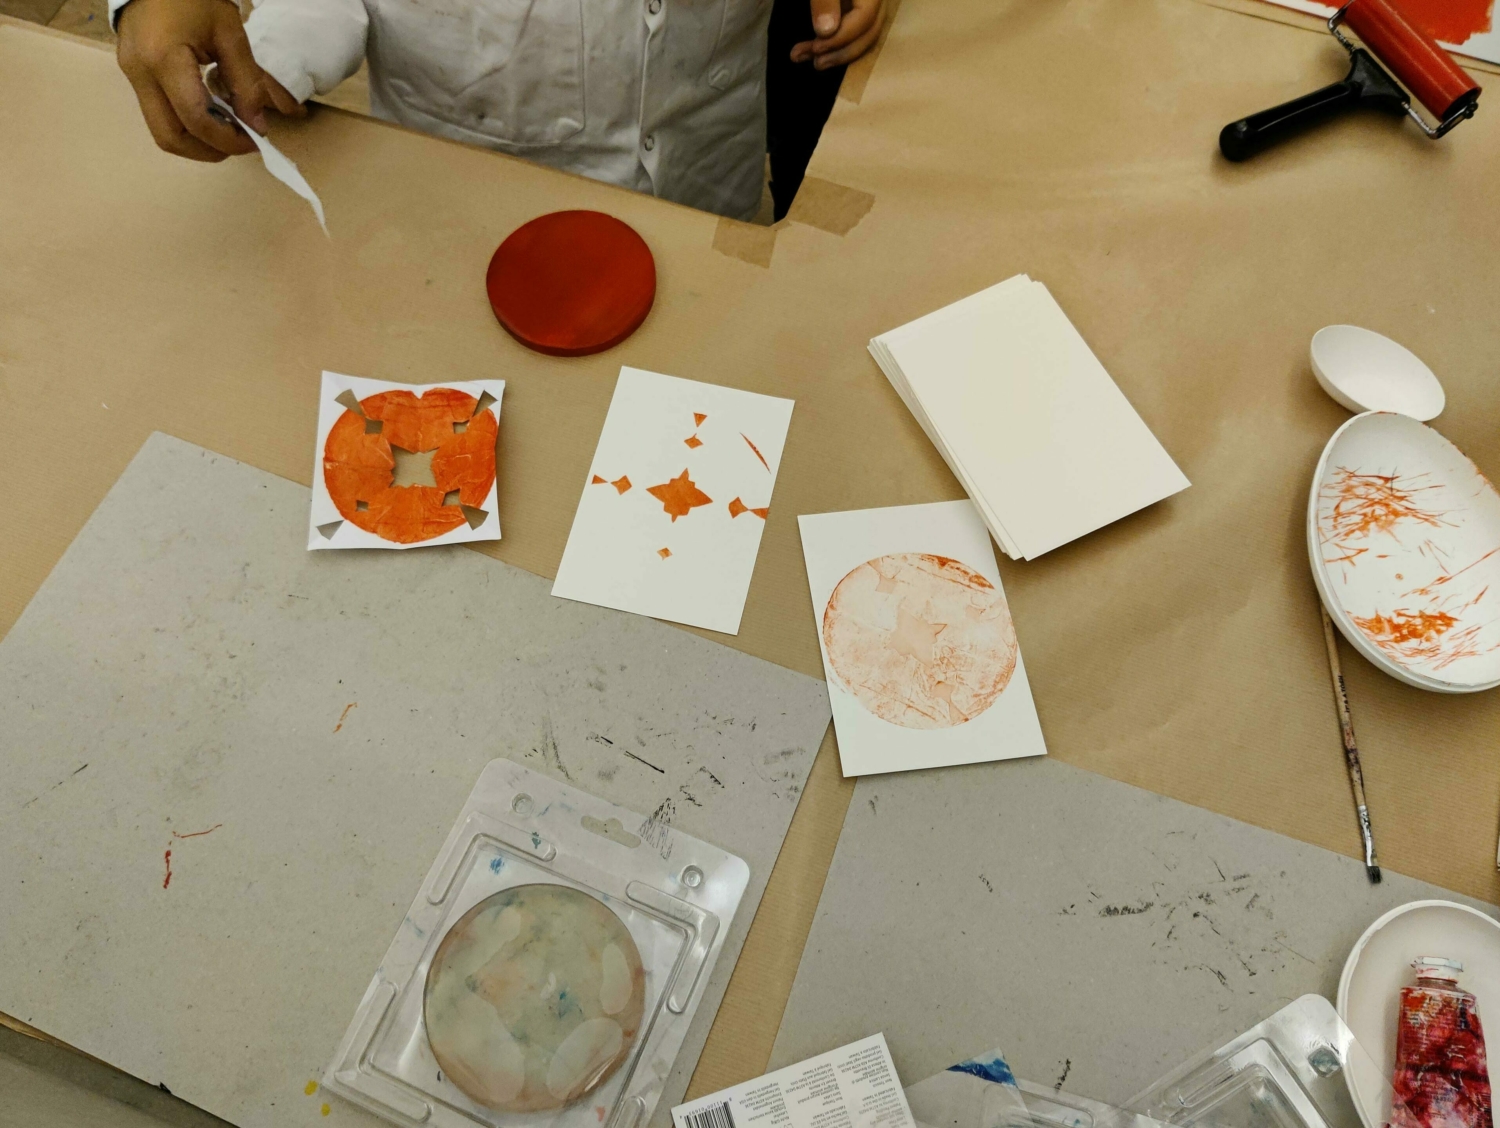 A child participating in a print workshop at Mudam.